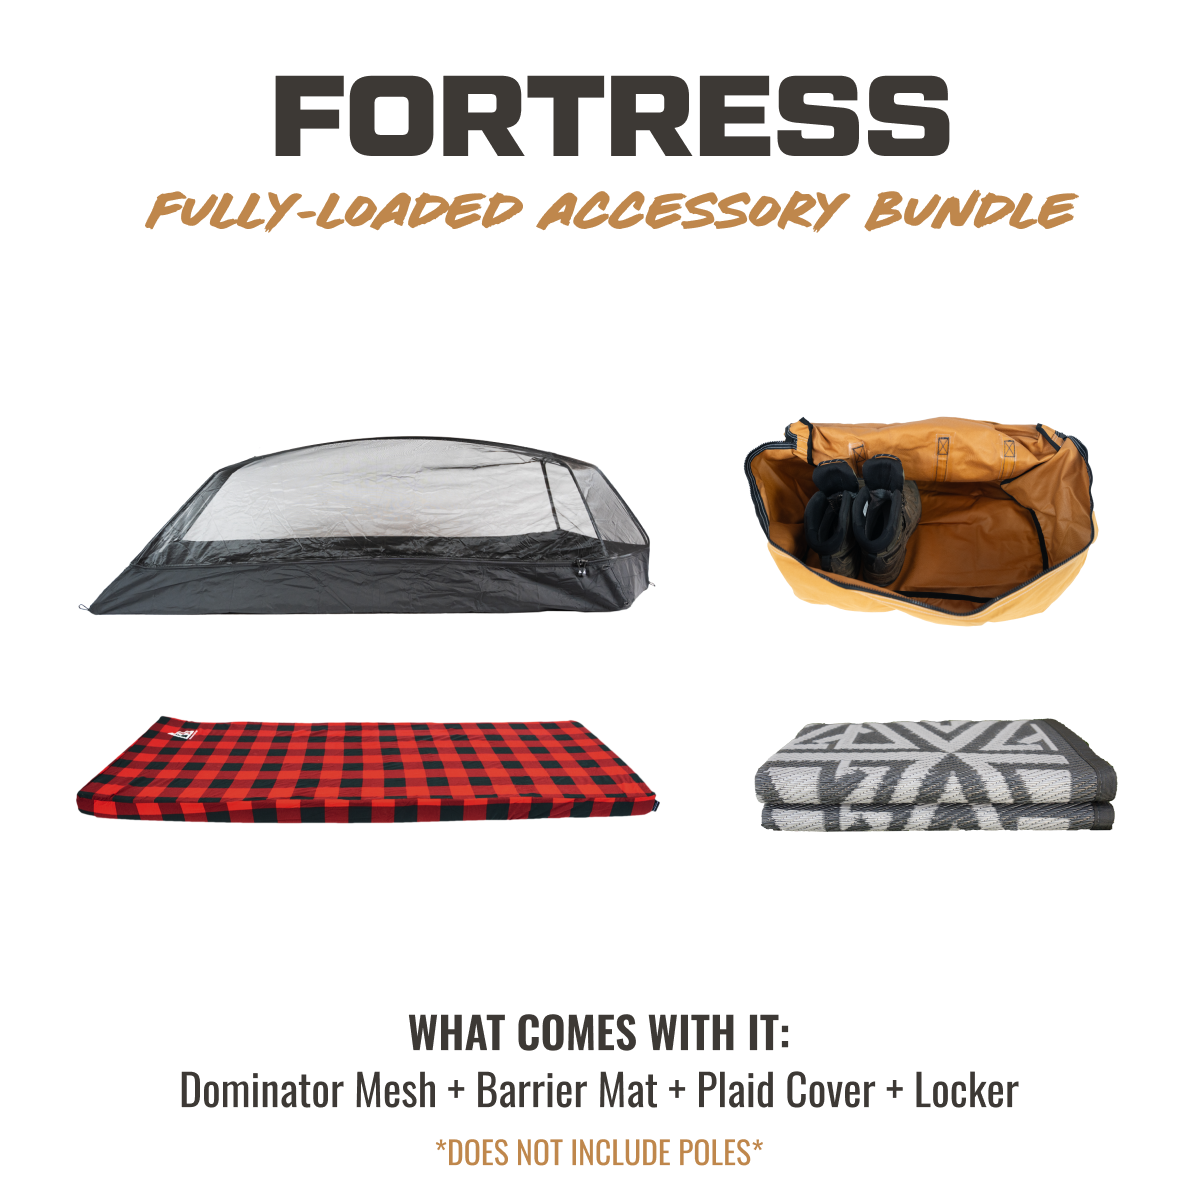 Fully-Loaded Accessories Bundle